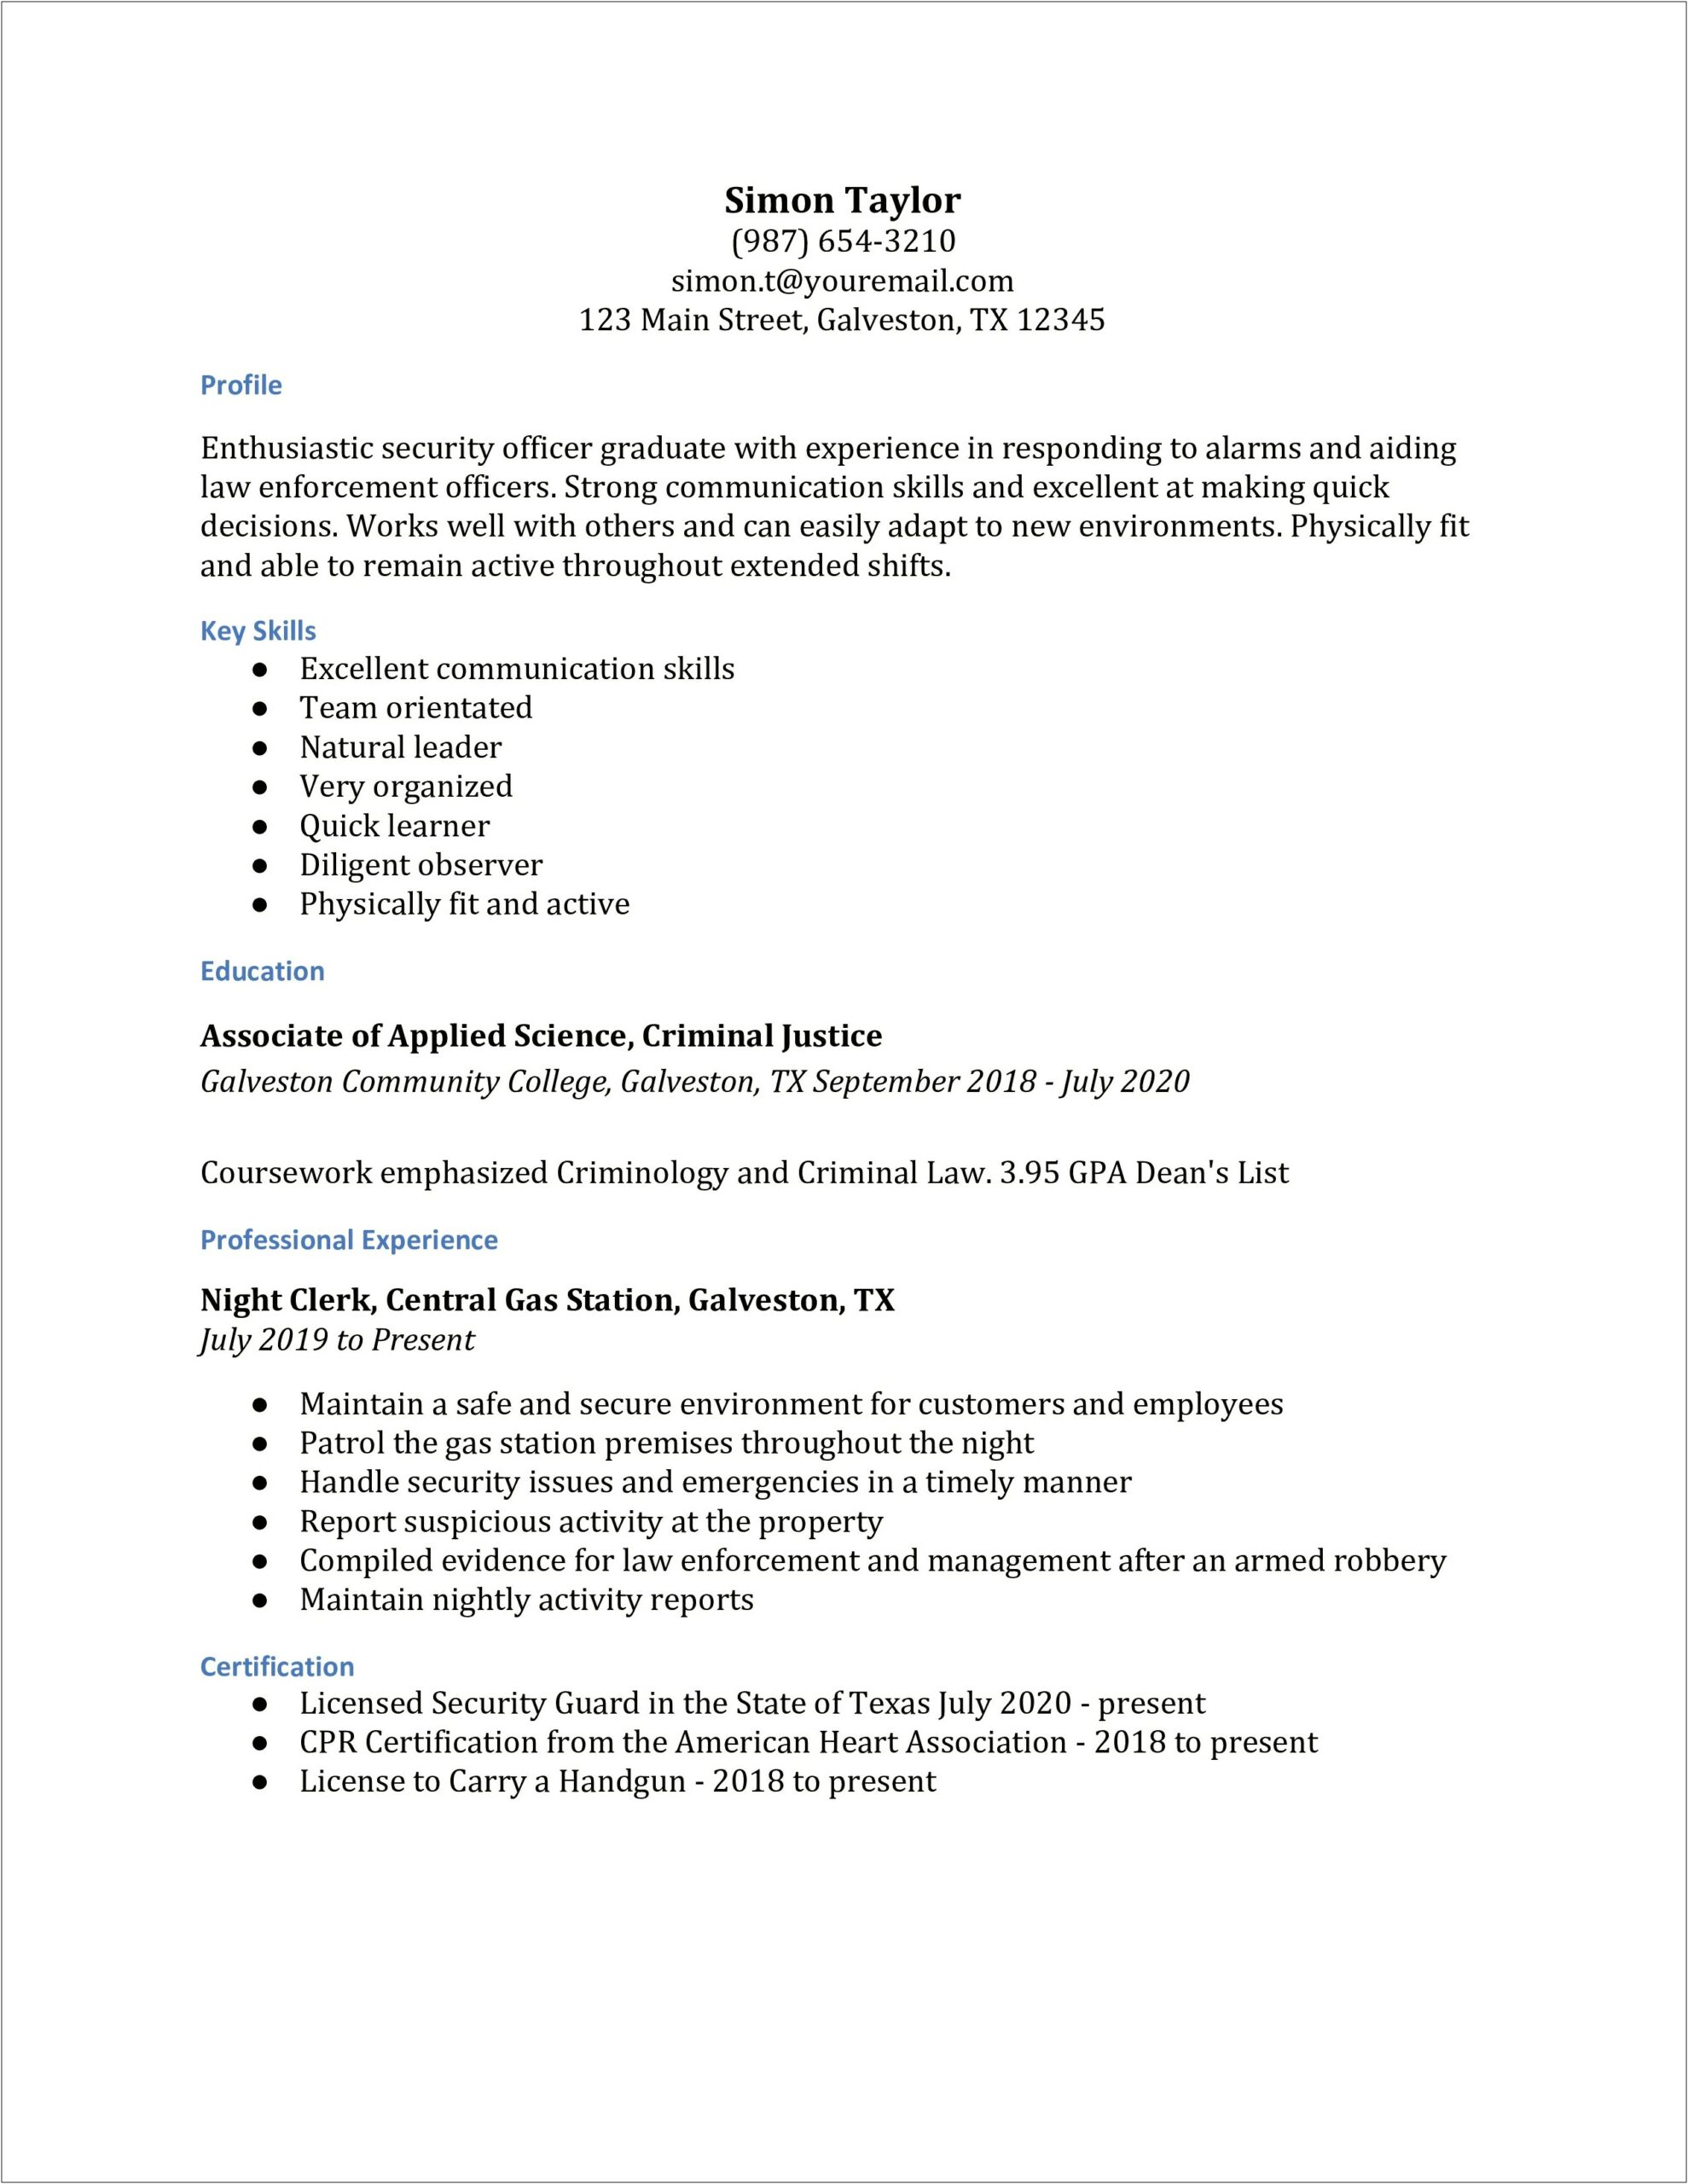 Resume For A Security Guard No Experience